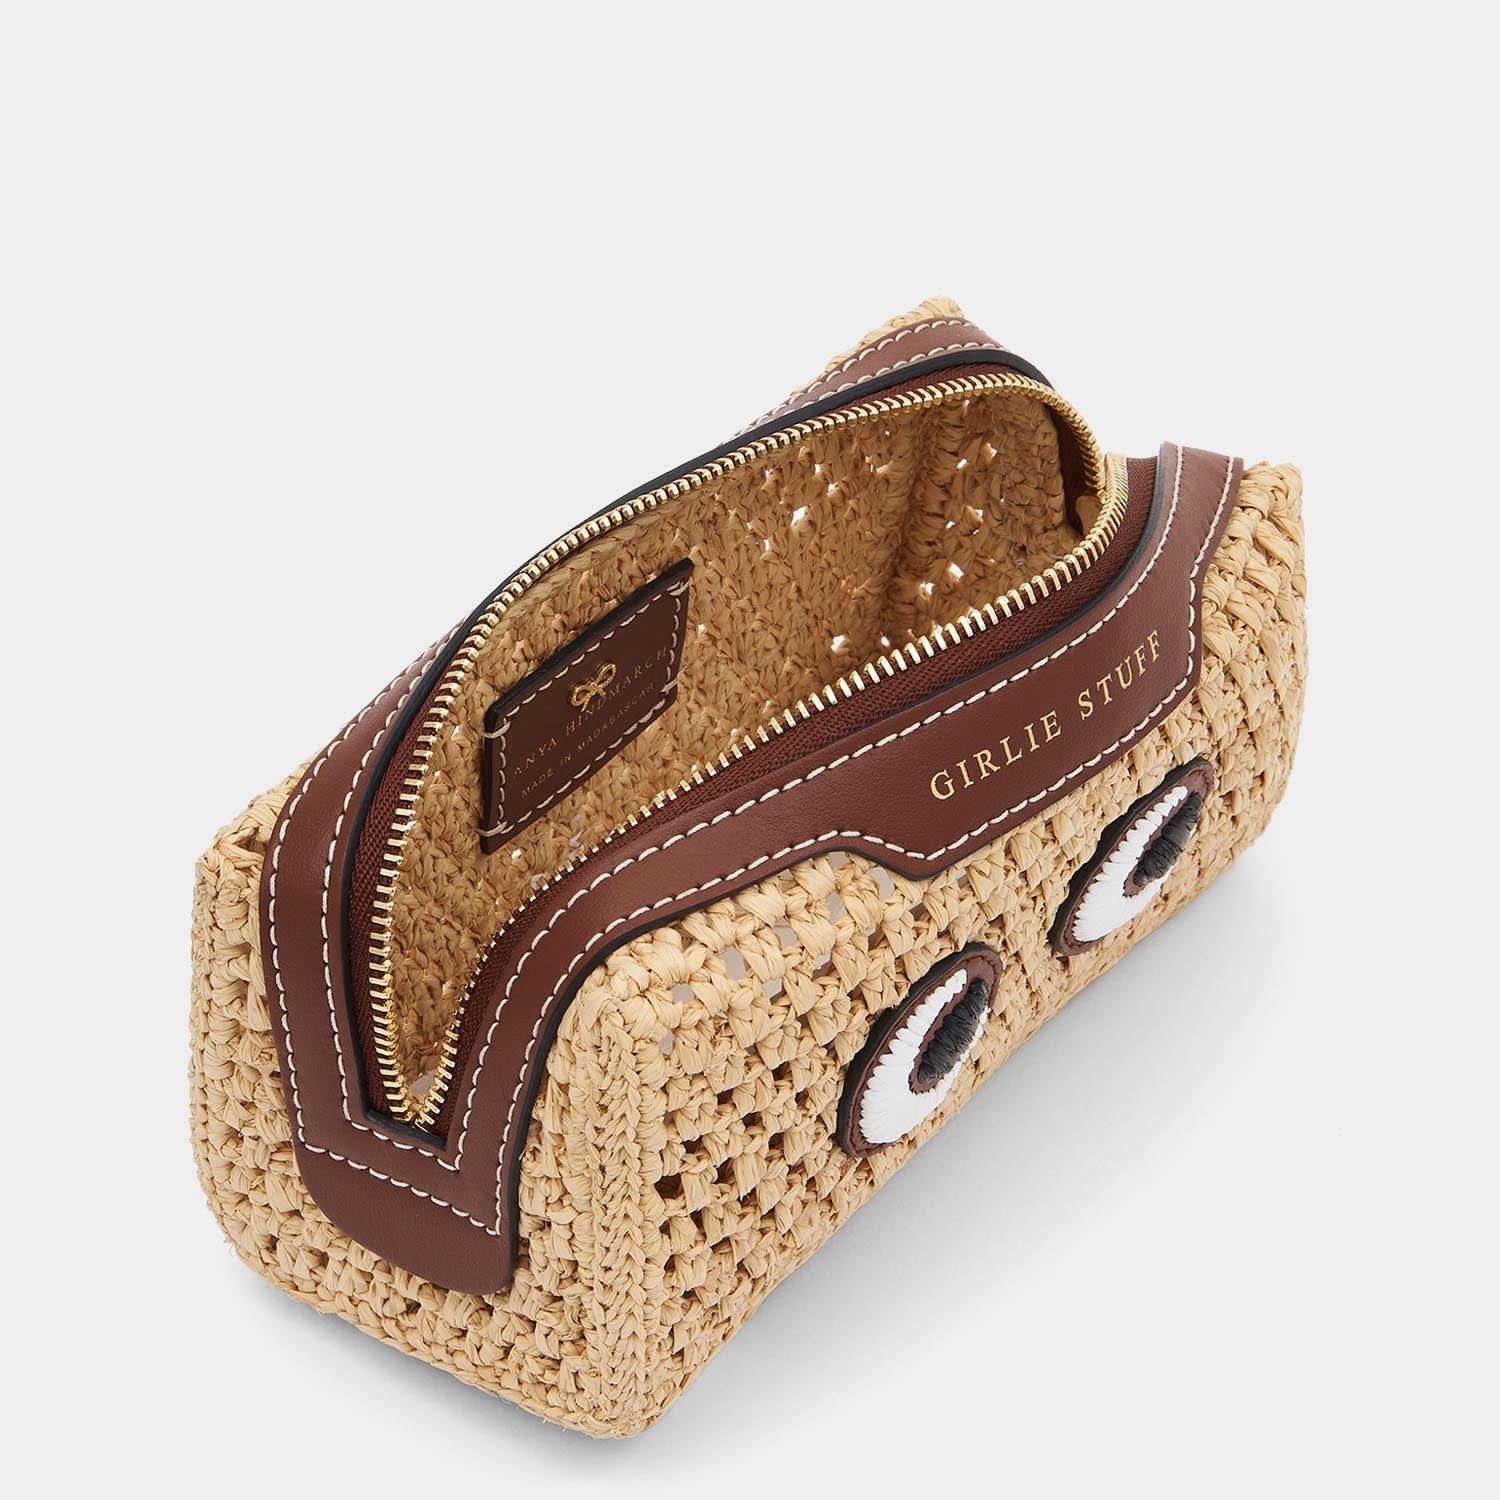 Eyes Girlie Stuff Pouch -

                  
                    Raffia in Natural -
                  

                  Anya Hindmarch US
